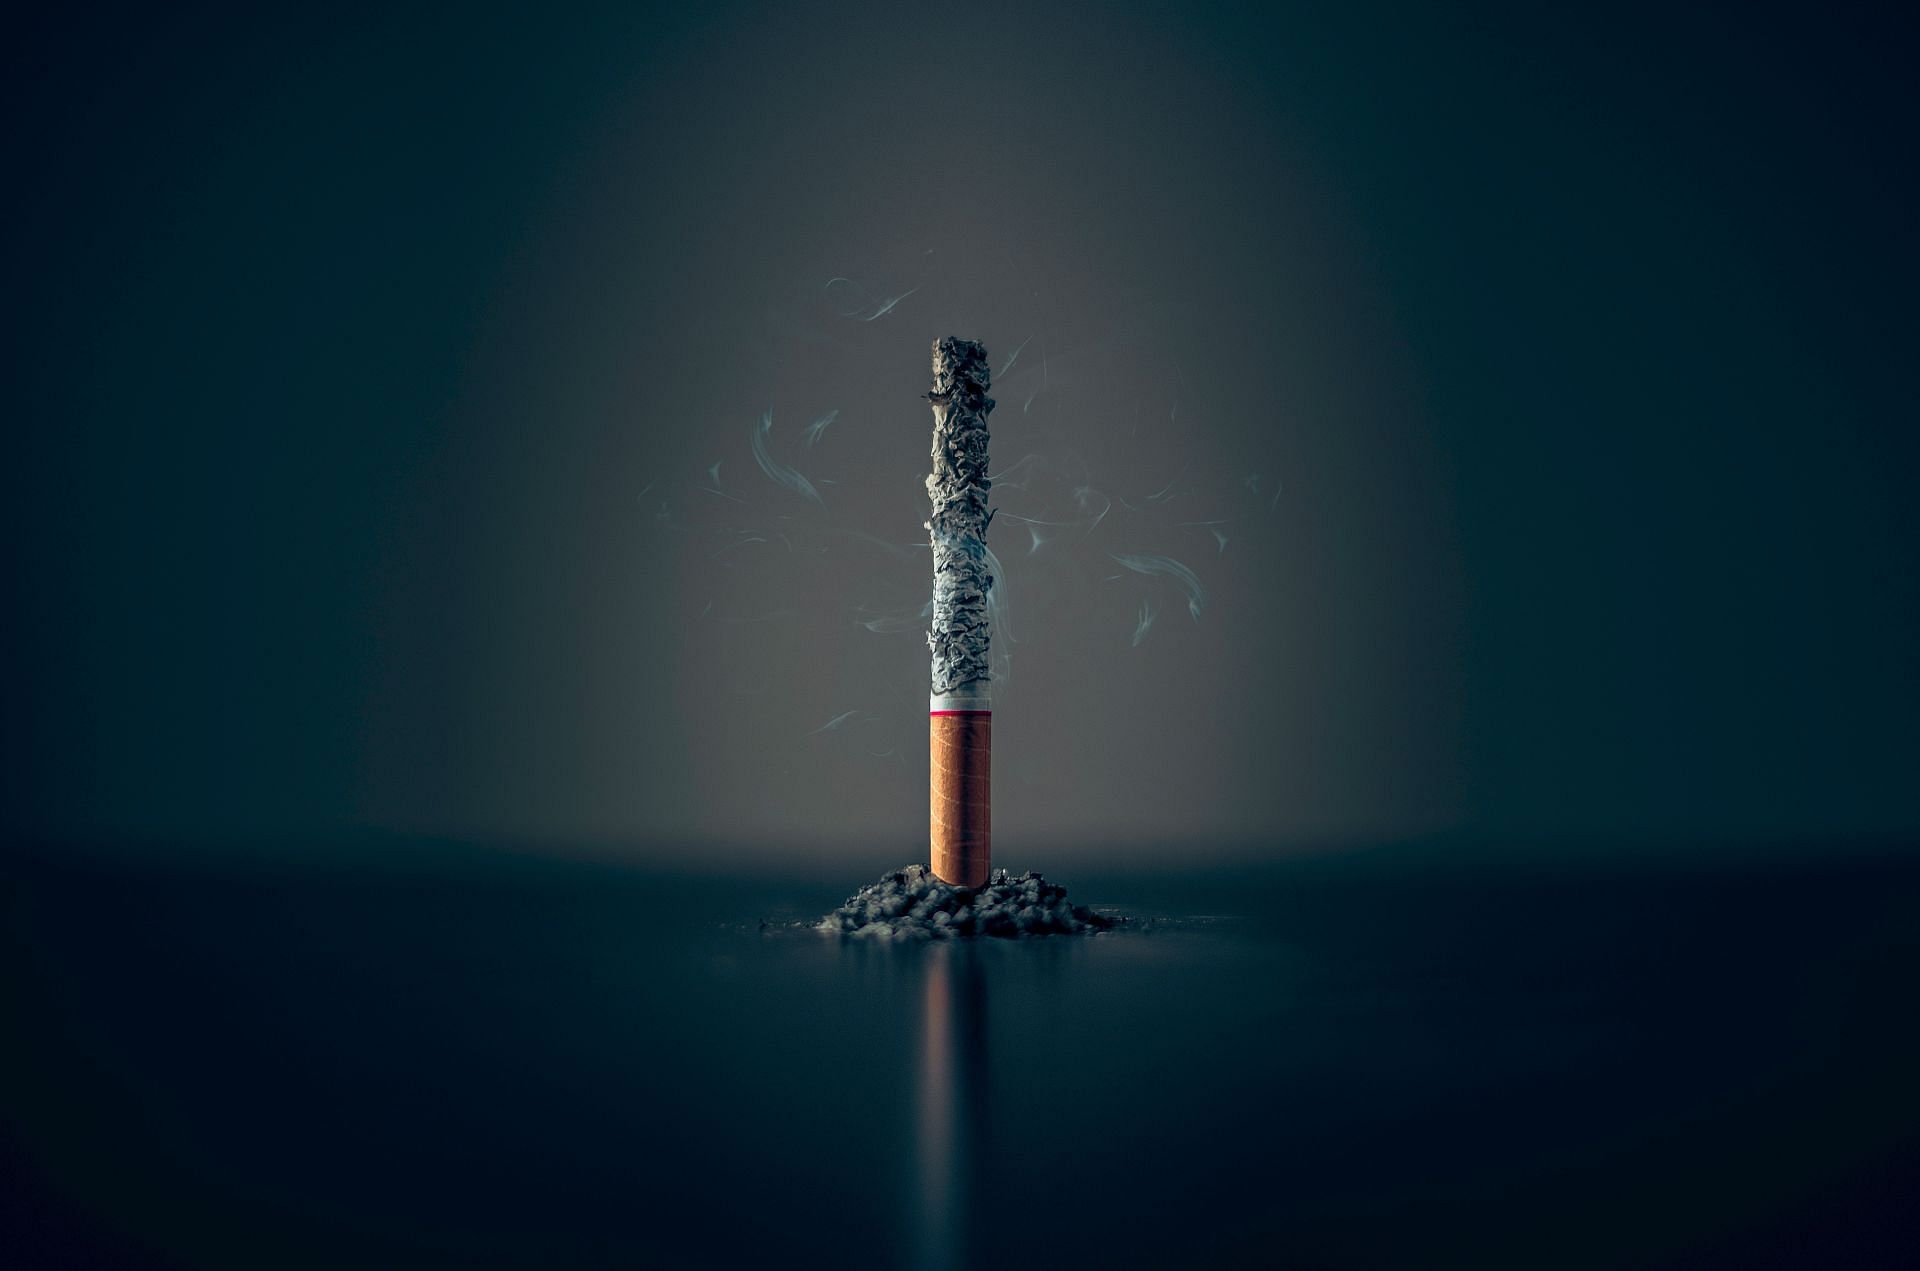 Quit smoking to start with lung detox. (Image by Mathew Macquarrie/Unsplash)